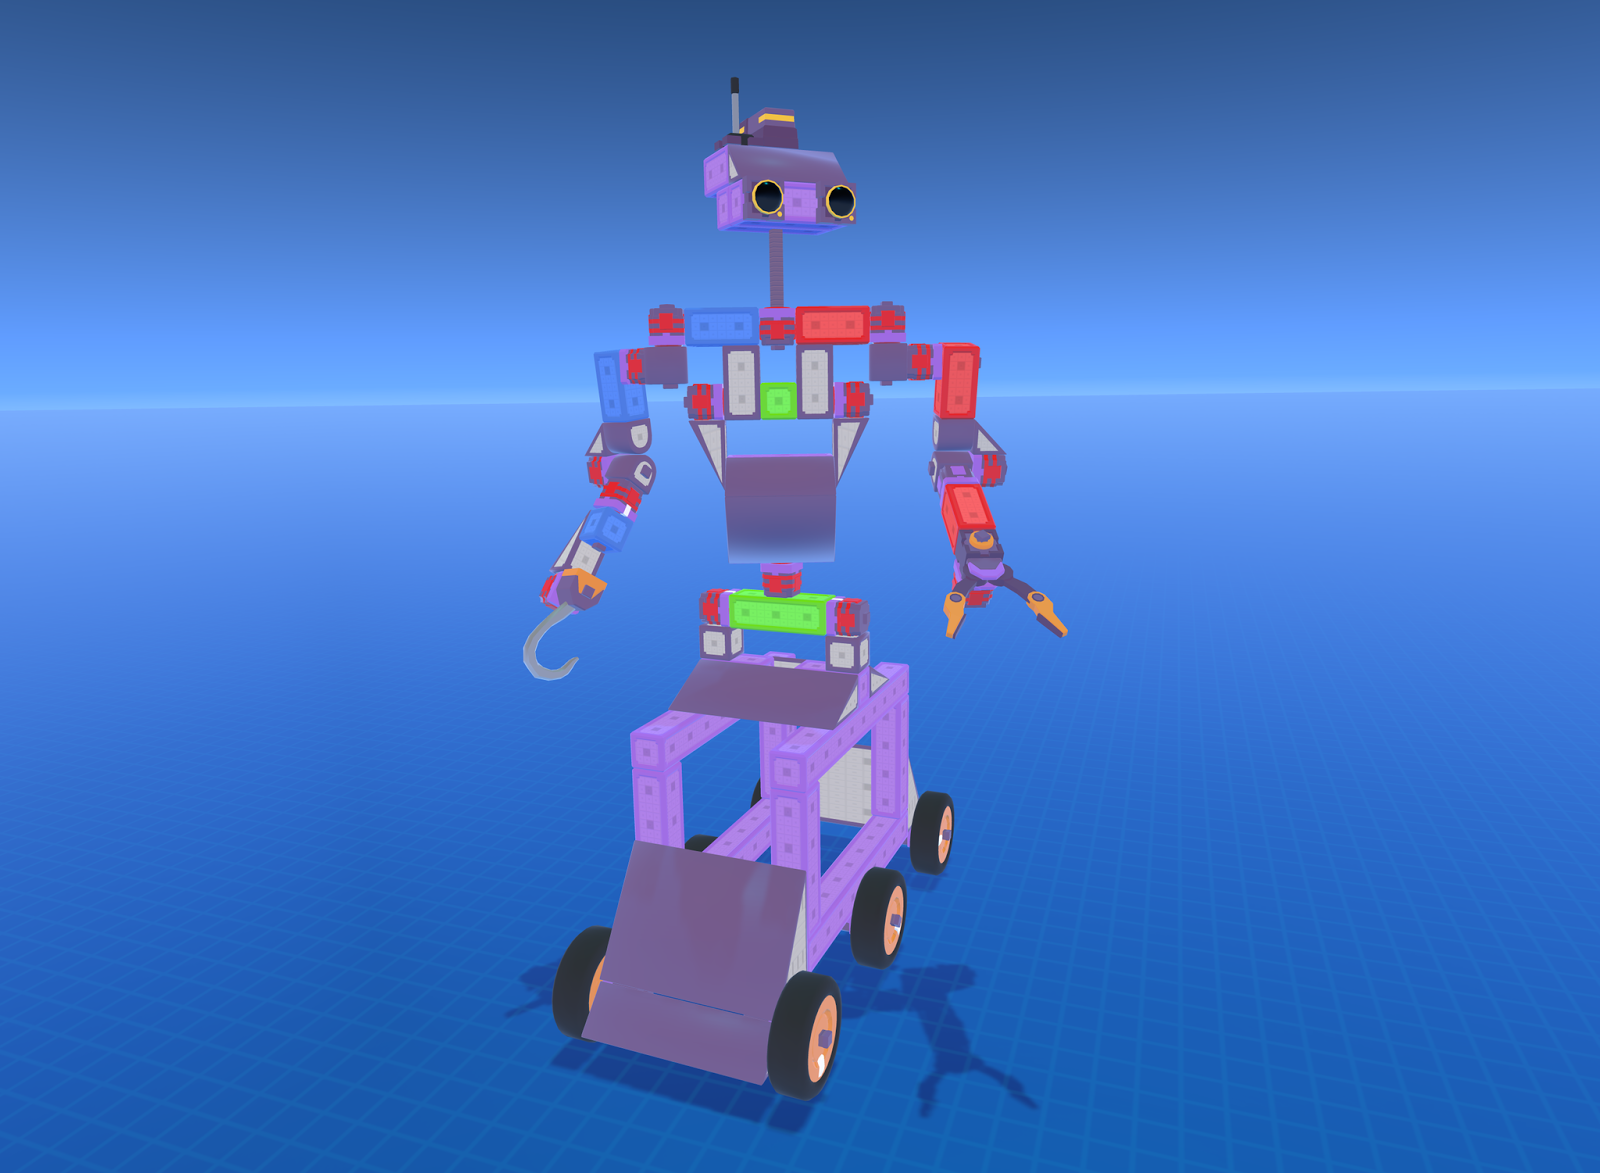 Terminologi Insister fuzzy Serious Games Offering Players An Inroad To The World Of Robotics